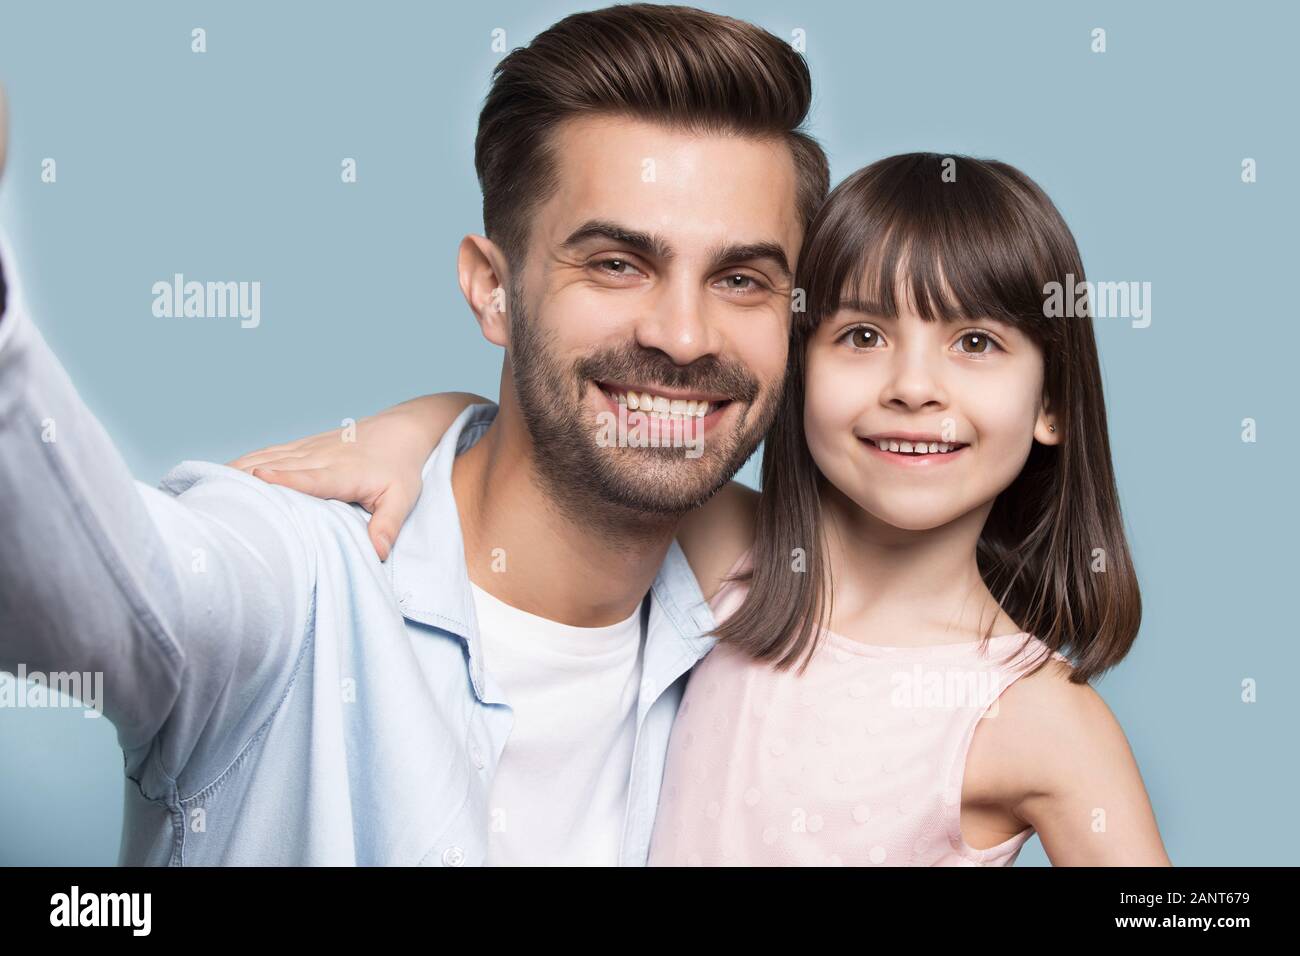 Happy young guy taking selfie shot with sister or daughter. Stock Photo